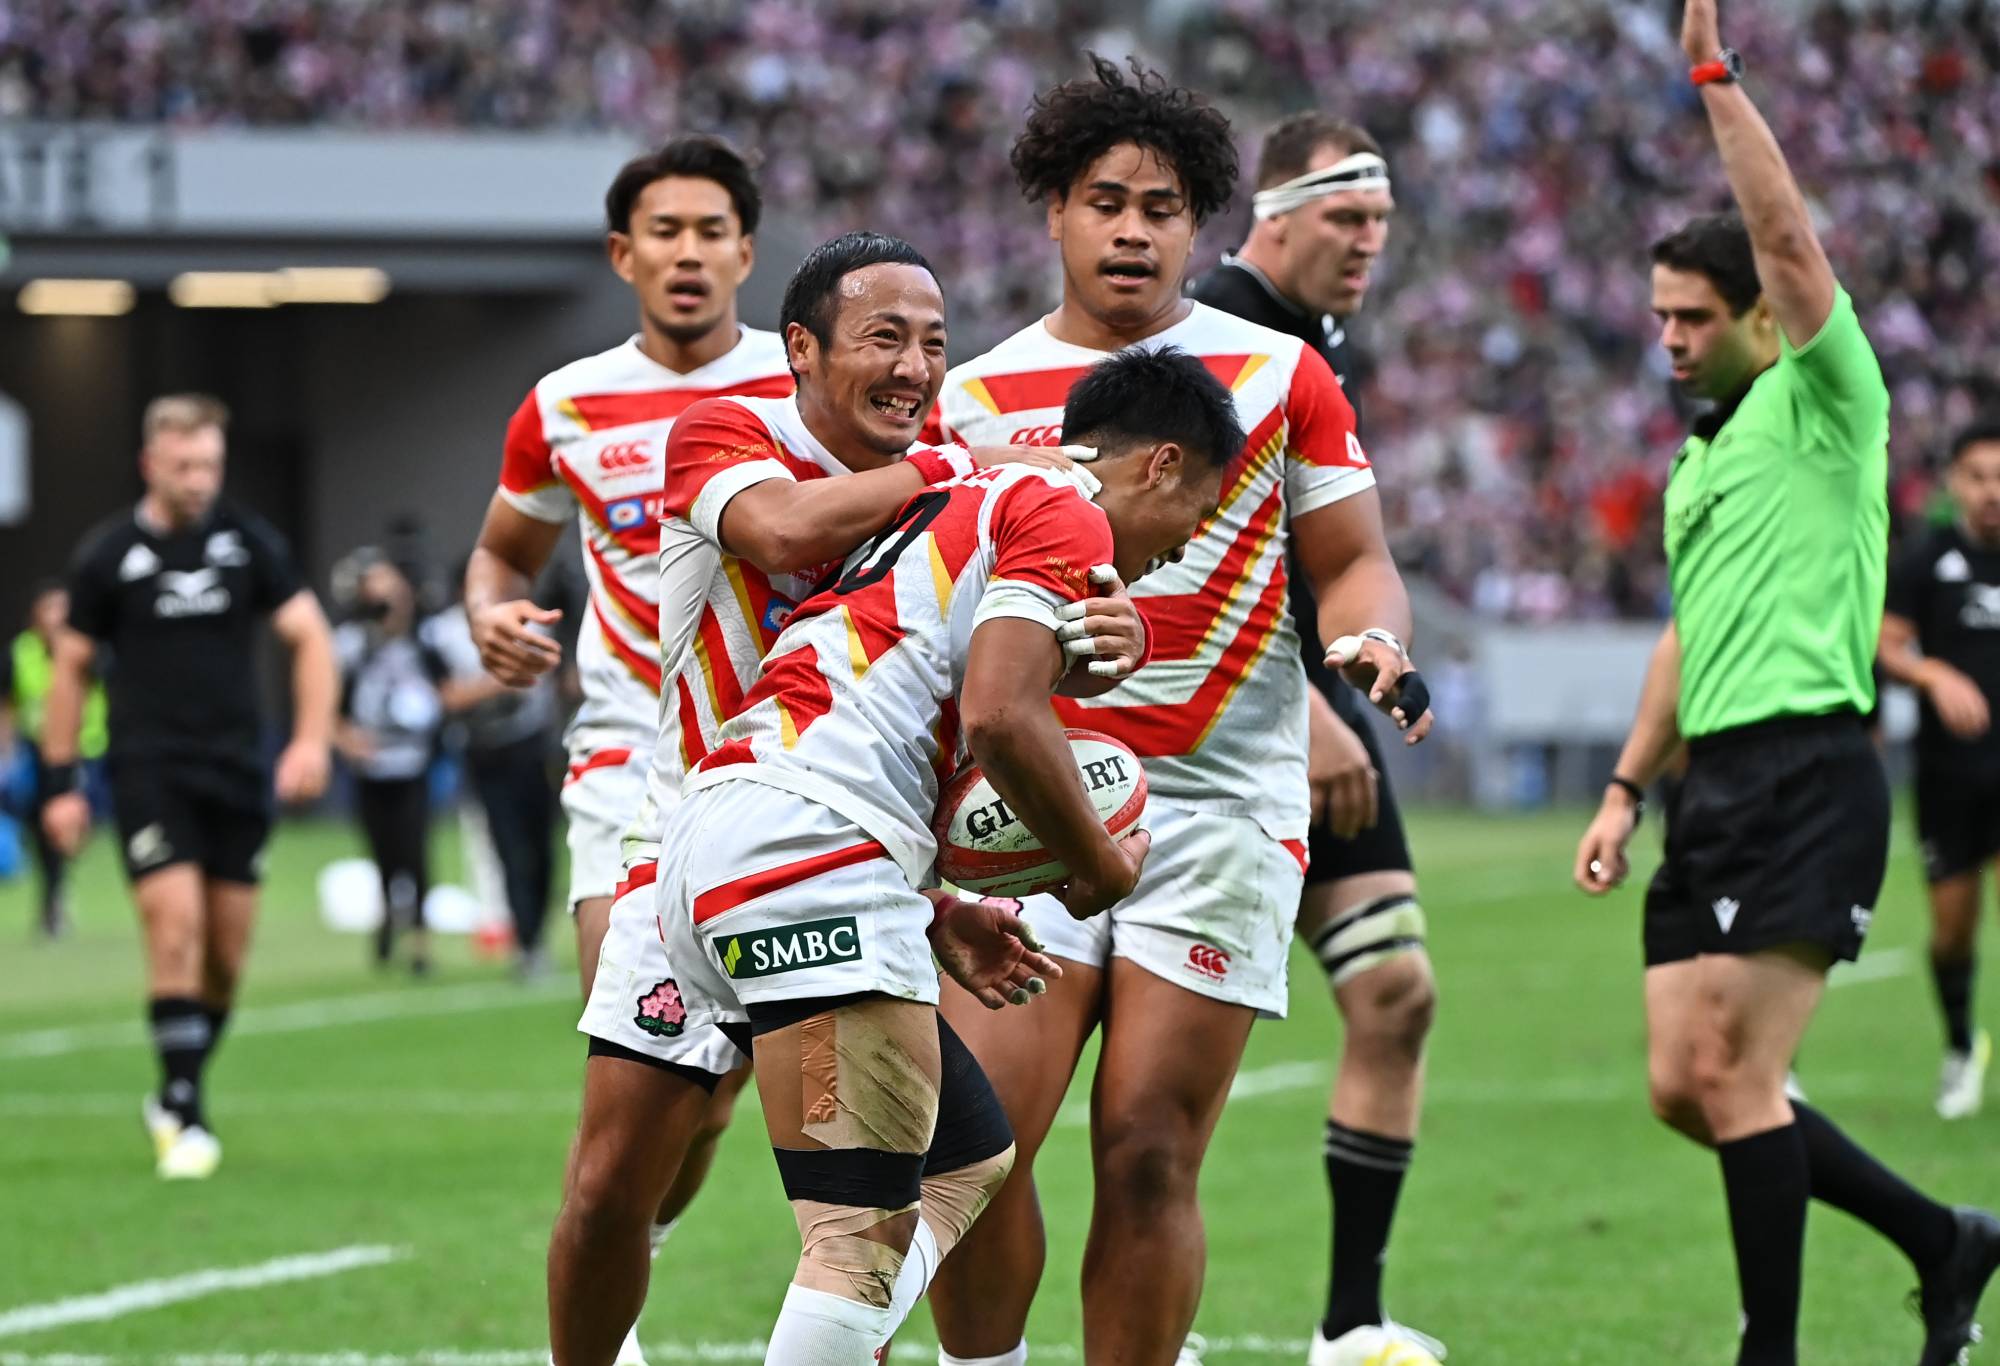 Takuya Yamasawa (C)of Japan is congratulated by his teammates after scoring his side's first try during the international test match between Japan and New Zealand All Blacks at National Stadium on October 29, 2022 in Tokyo, Japan. (Photo by Kenta Harada/Getty Images)